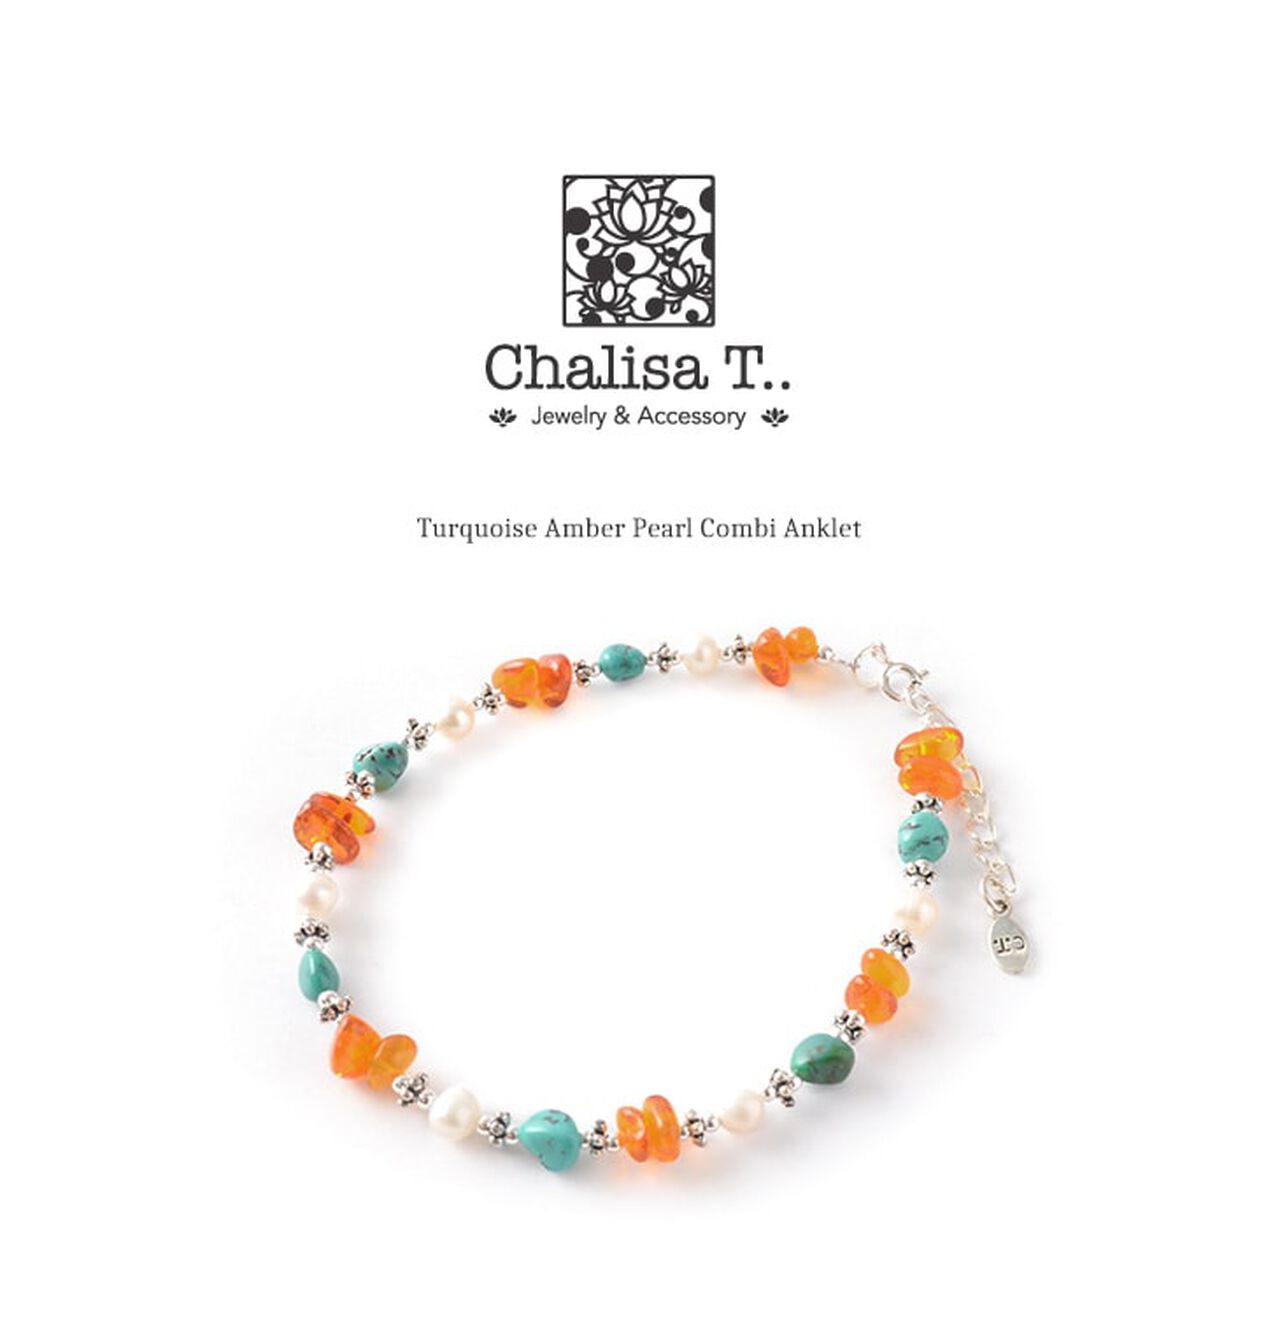 Turquoise Amber Pearl Combi Anklet,, large image number 1